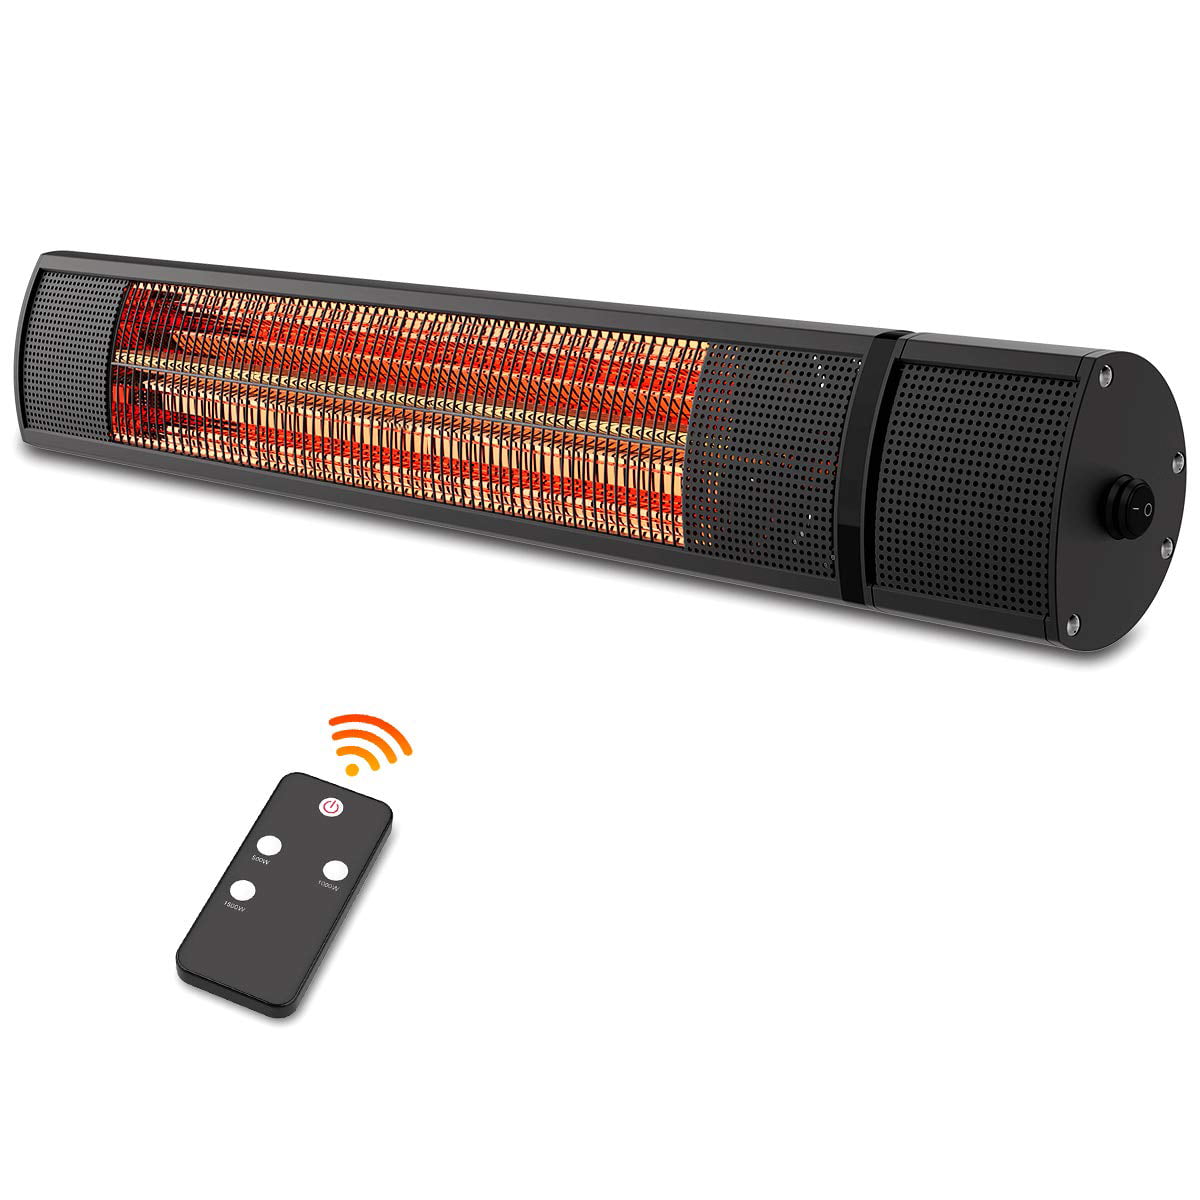 Remote SereneLife SLOHT42 Tip-over Safety Switch Infrared Outdoor Electric Space Heater 1500W Portable Fast Heating Outdoor Tower Heater Odorless Waterproof Electric Patio Heater w/ Oscillation 